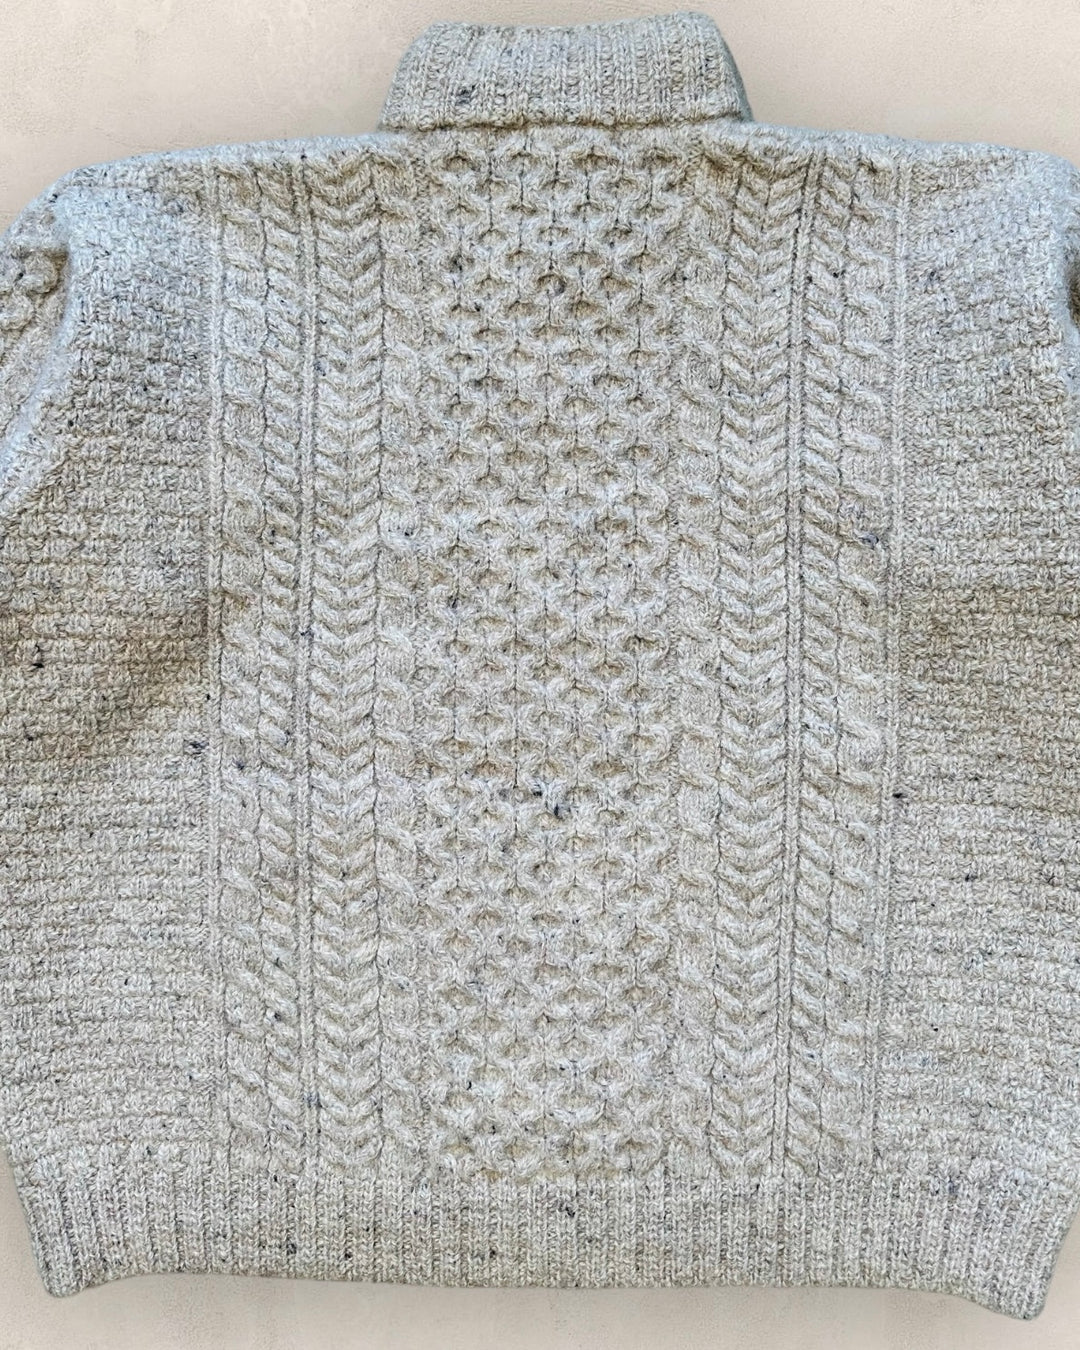 Wool buttoned collar sweater - Size S/M